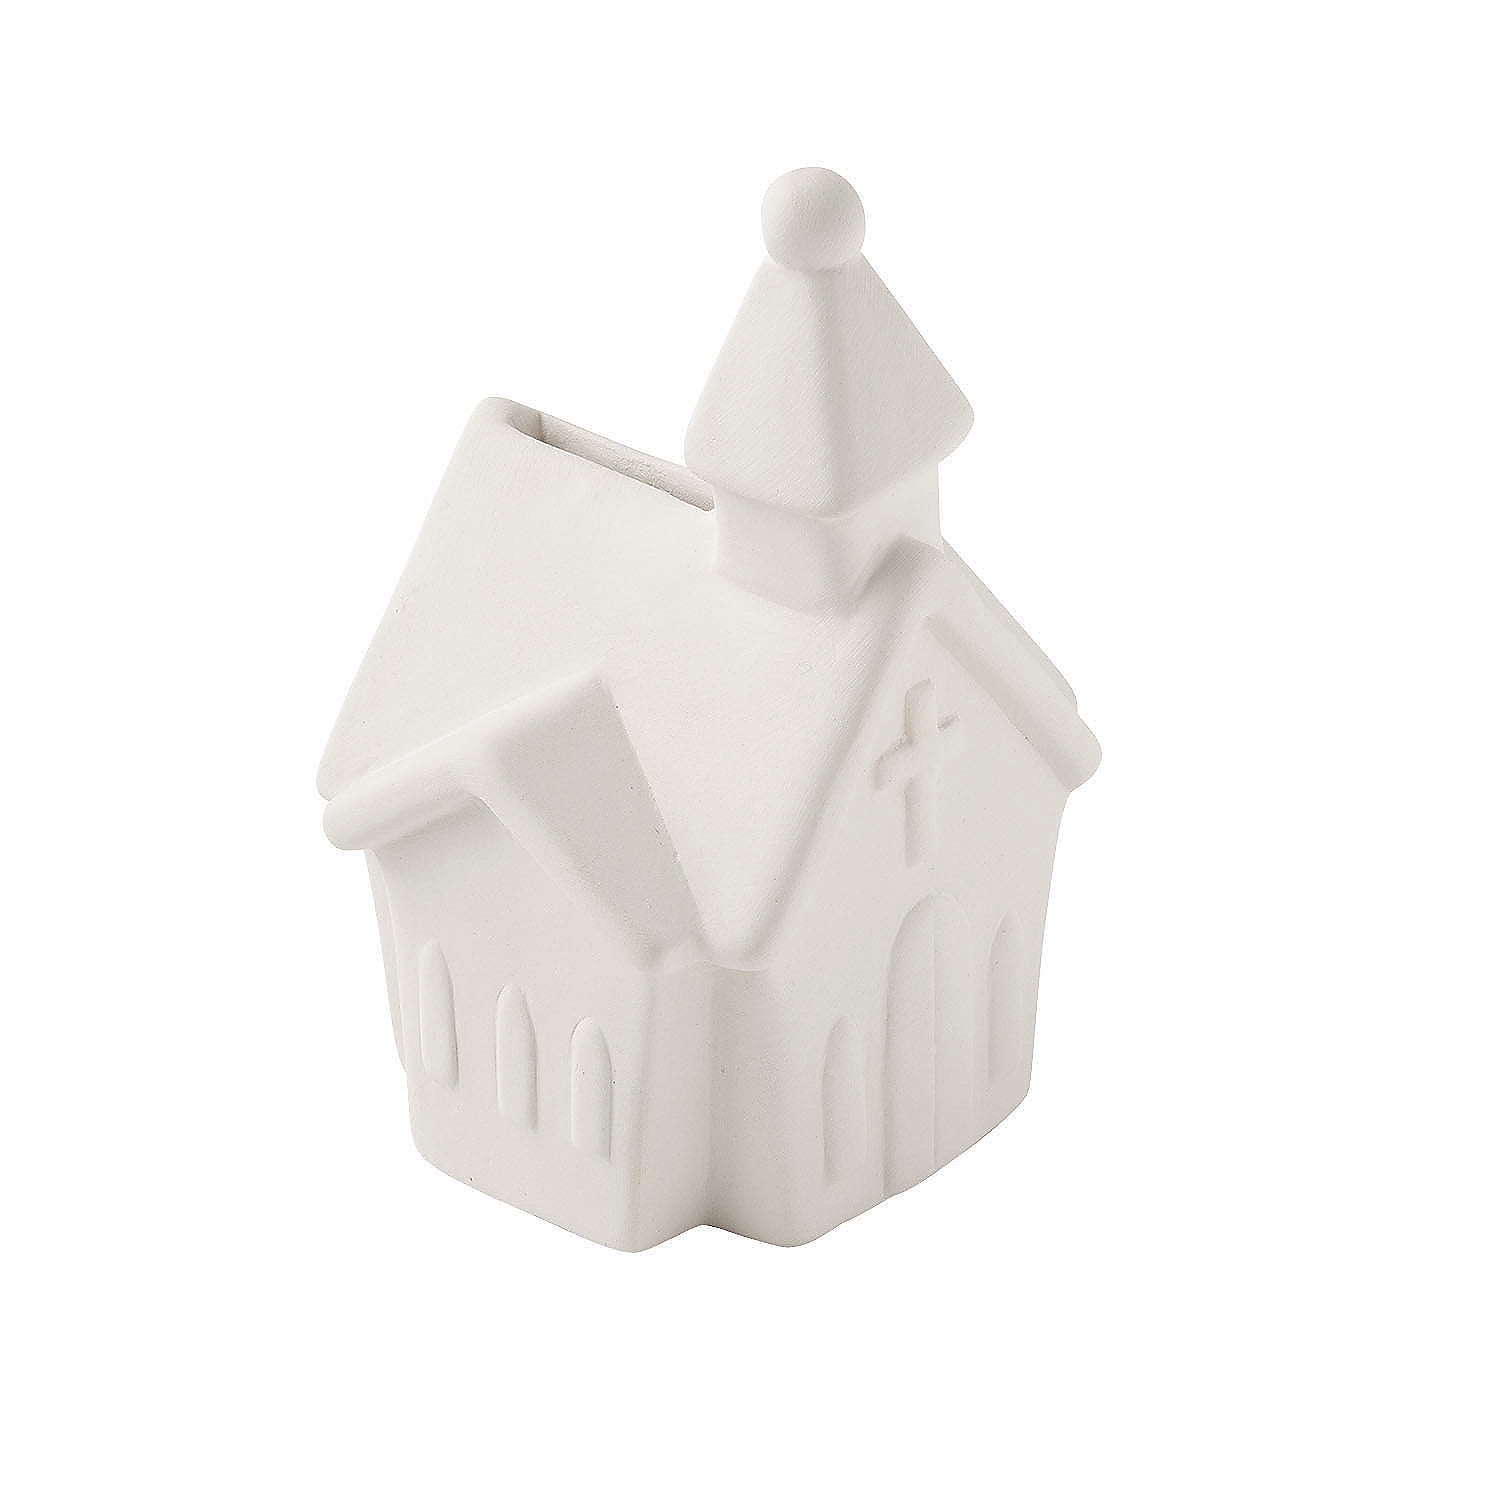 DIY Ceramic Churches, Craft Kits, Banks And Figurines, DYO - Ceramic, 12 Pieces, White